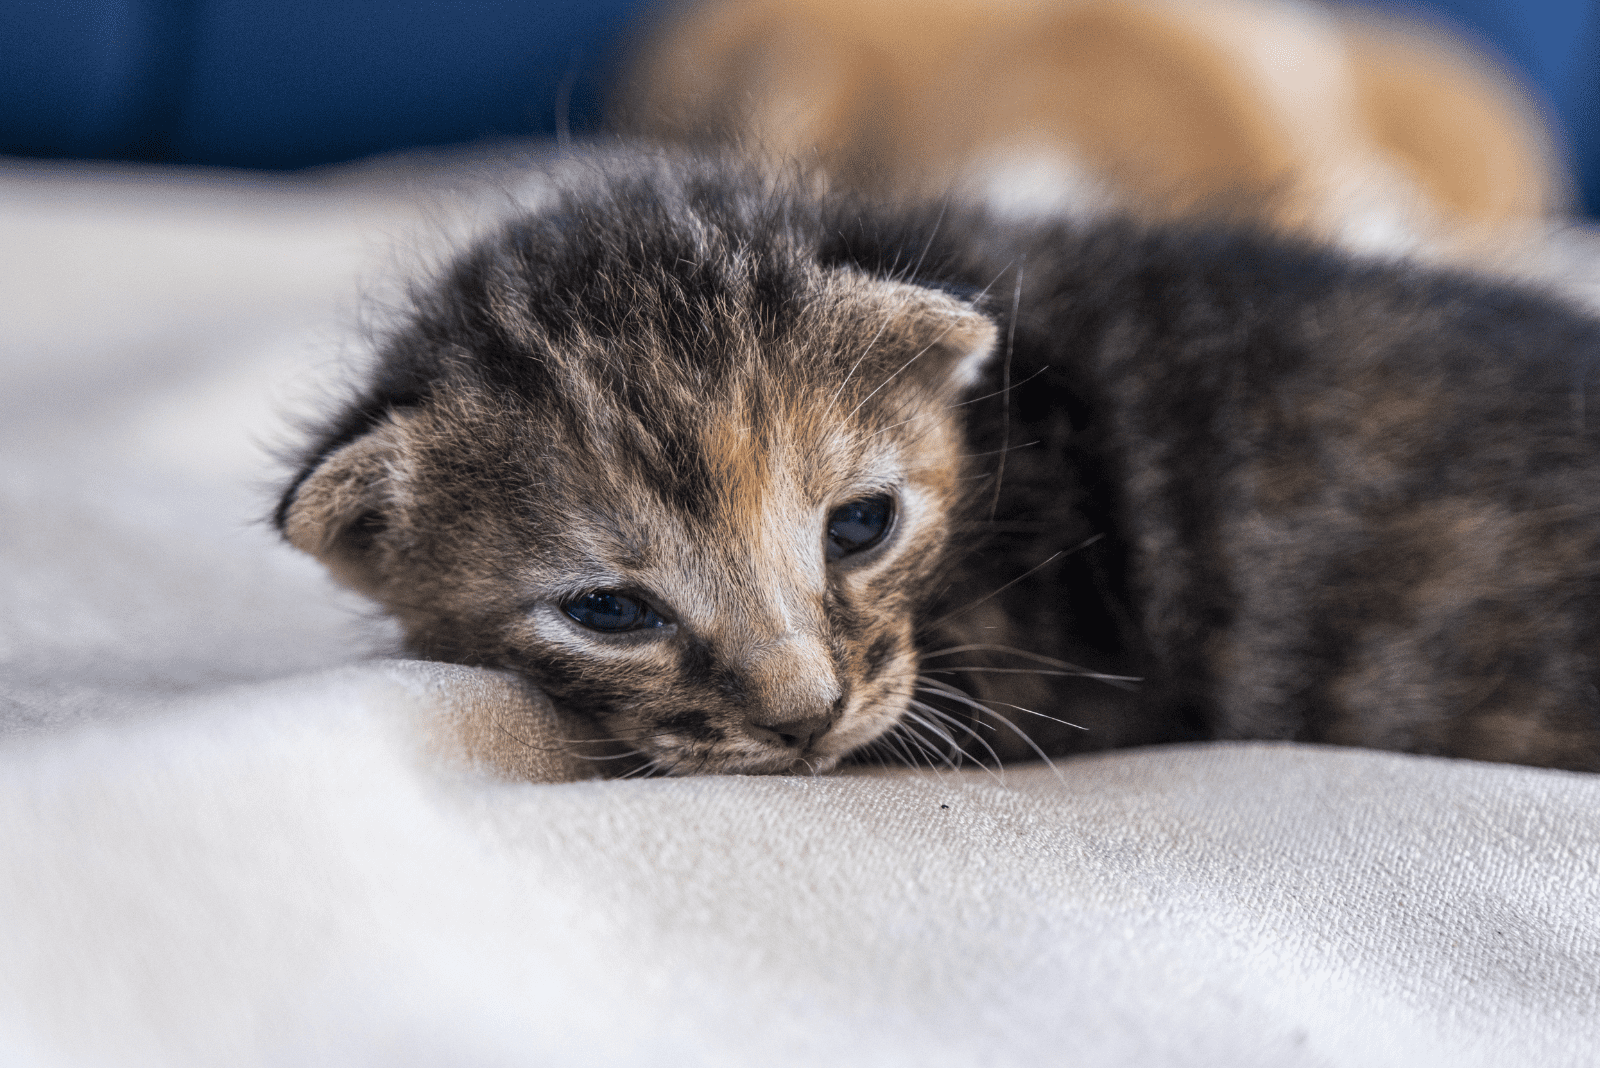 an adorable kitten lies with its eyes open